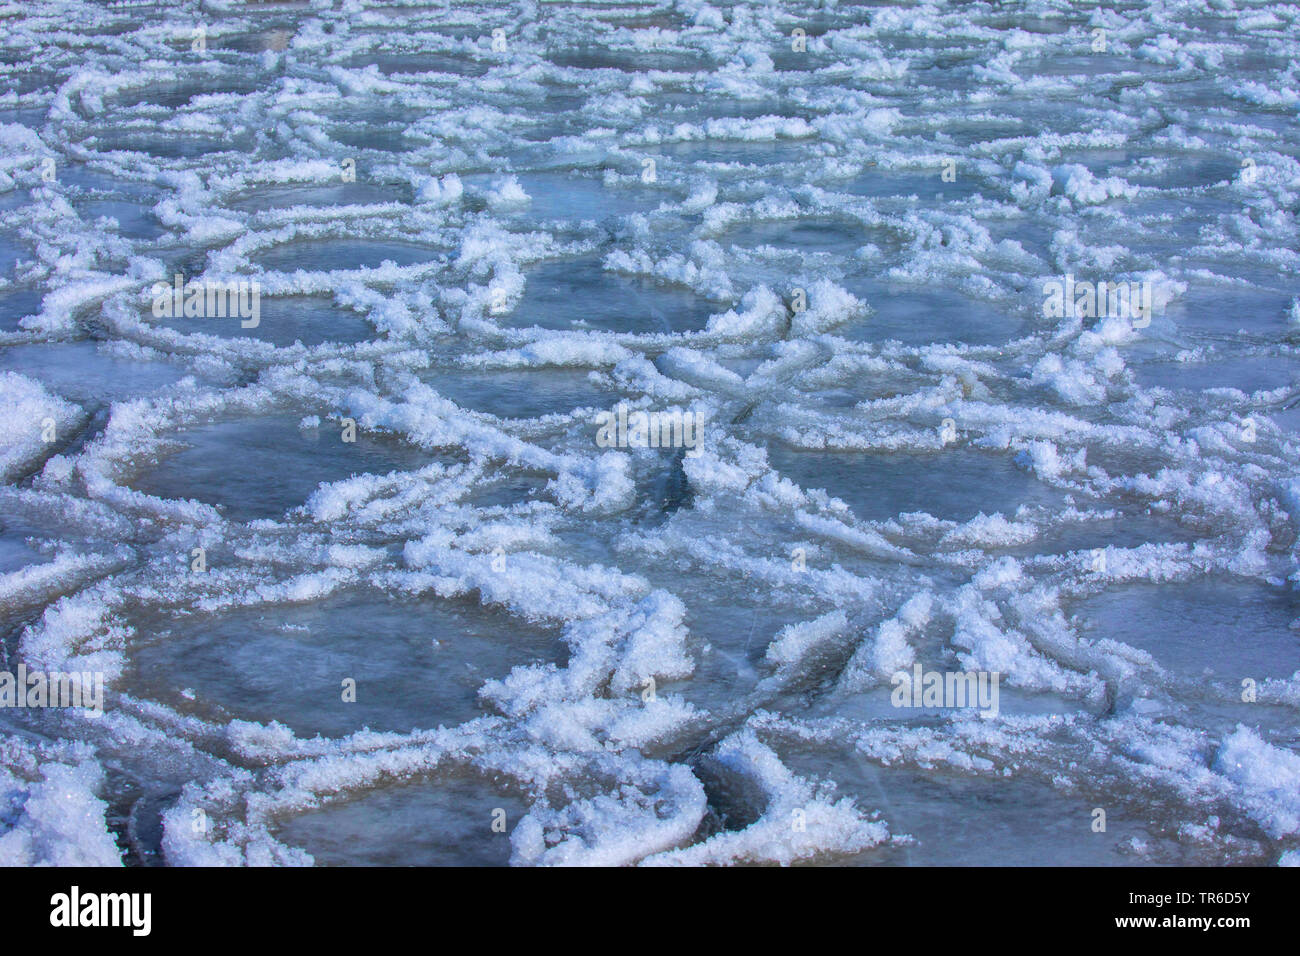 weirdly shaped ice floes in a bay after a winter storm, Germany, Bavaria, Lake Chiemsee Stock Photo